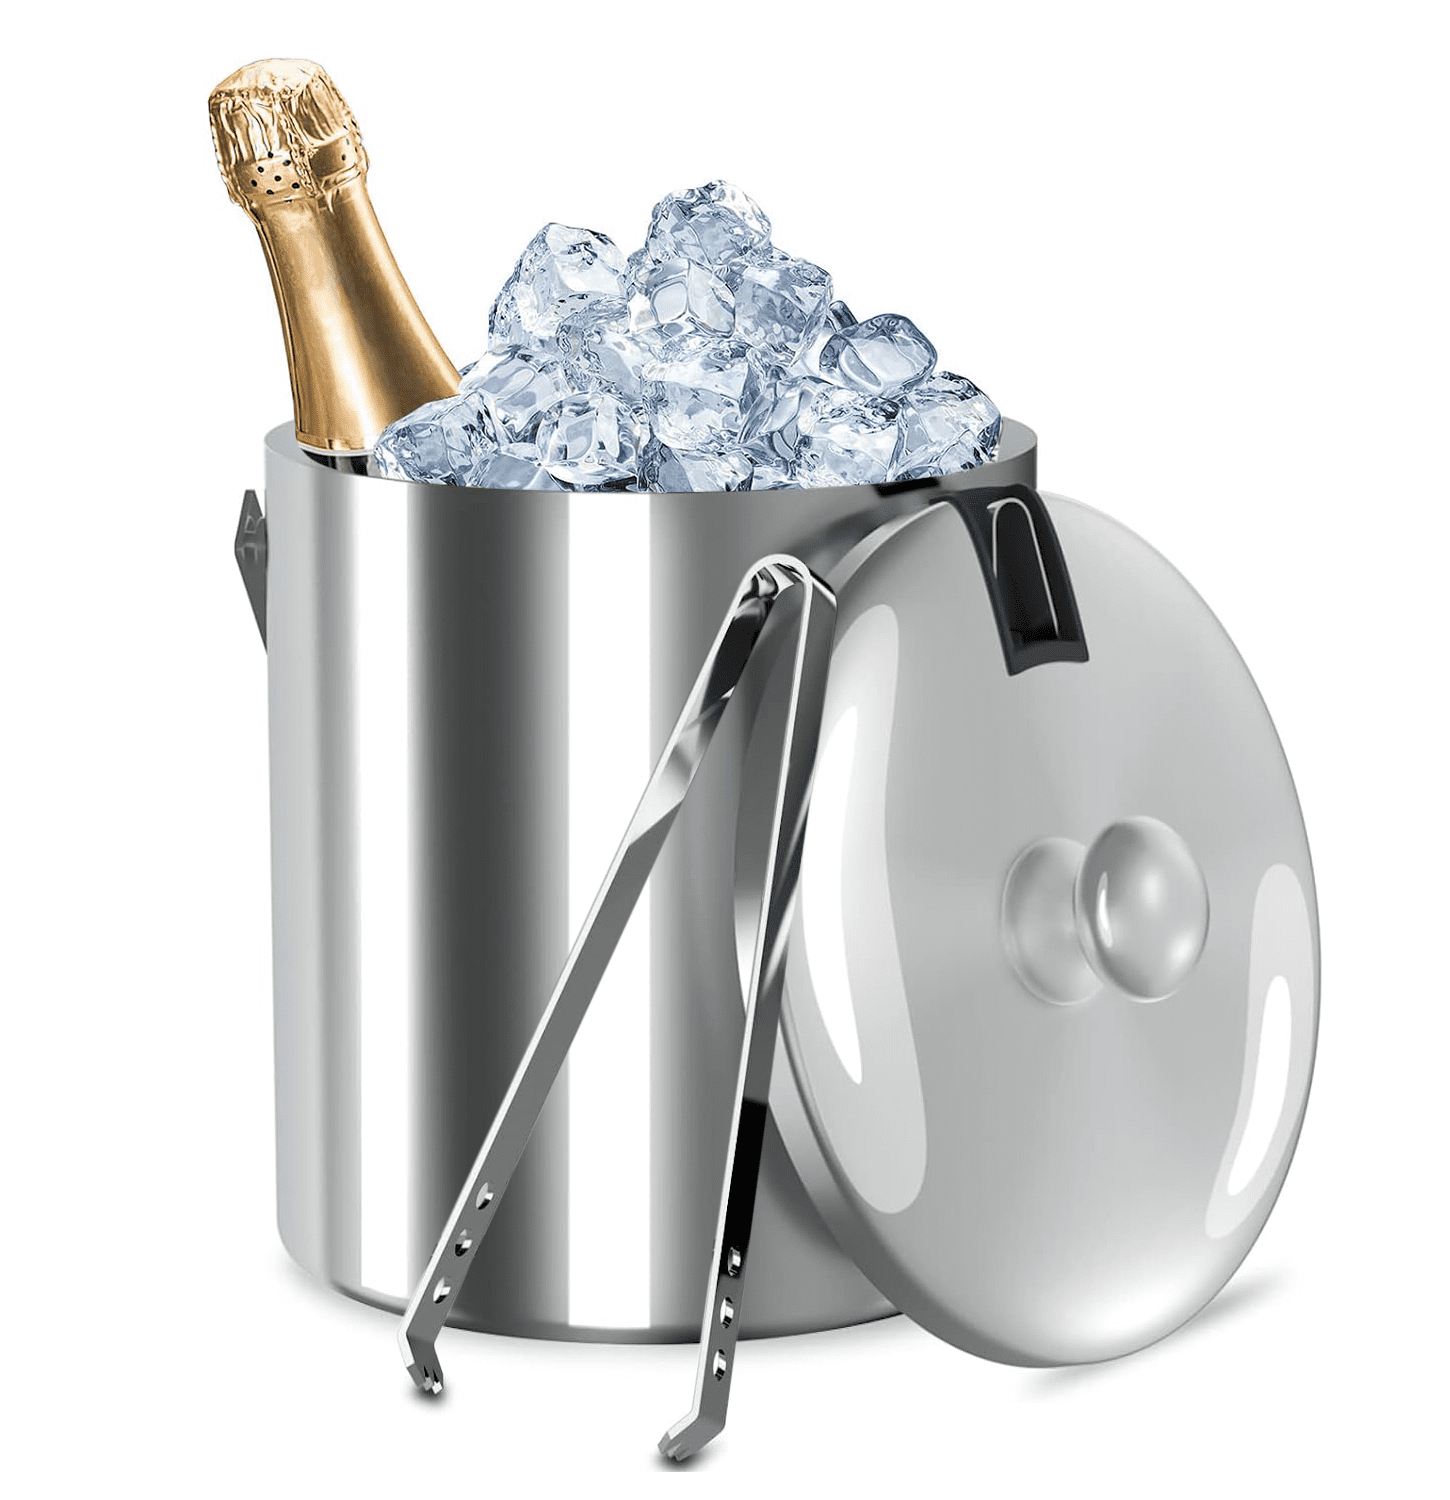  Double-Wall Stainless Steel Insulated Ice Bucket With Lid and  Ice Tong [3 Liter] Included Strainer Keeps Ice Cold & Dry, Carry leather  Handle, Great for Home Bar, Chilling Beer, Champagne, Wine